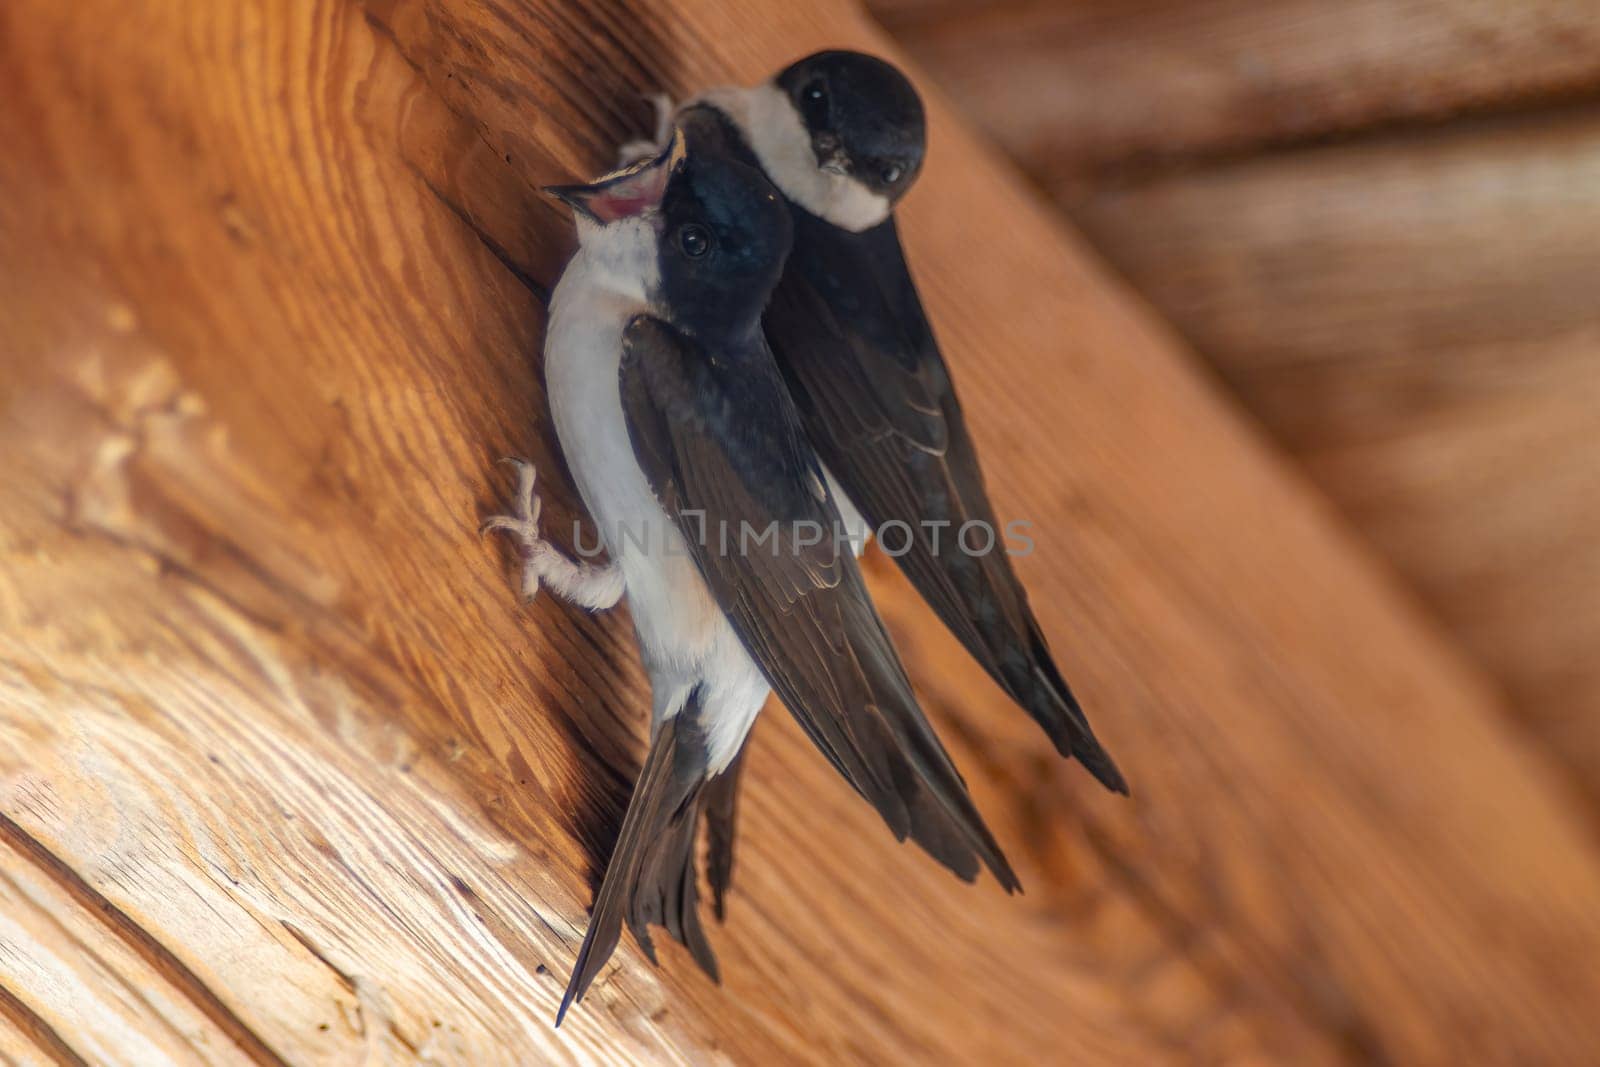 two house martins (Delichon urbicum) hang on a wooden beam and begin to build a nest